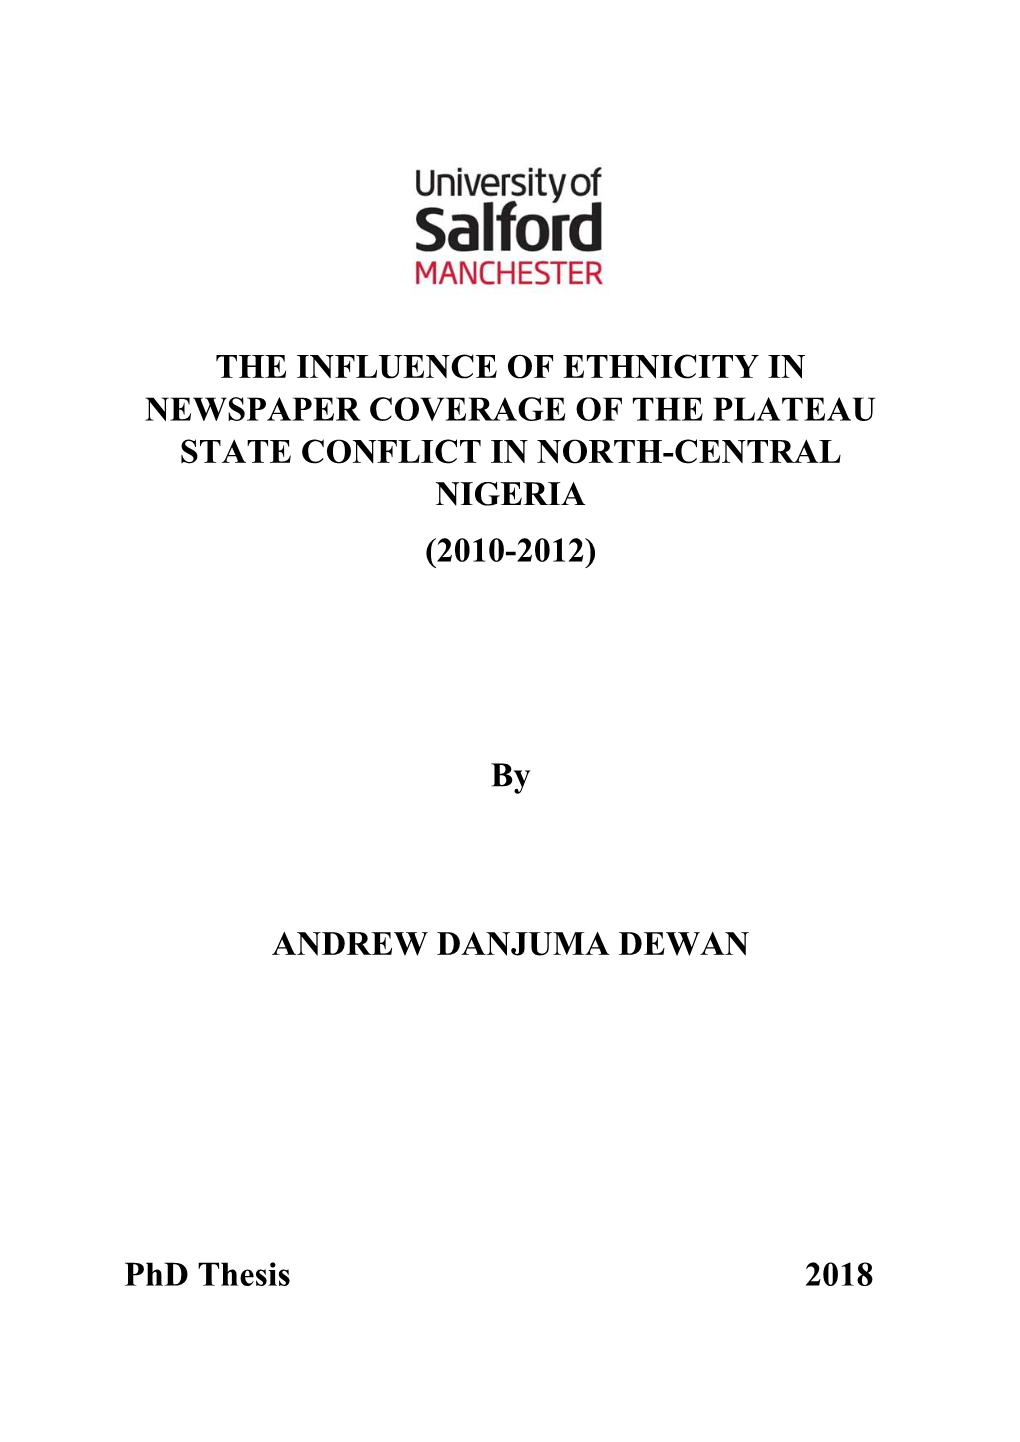 The Influence of Ethnicity in Newspaper Coverage of the Plateau State Conflict in North-Central Nigeria (2010-2012)